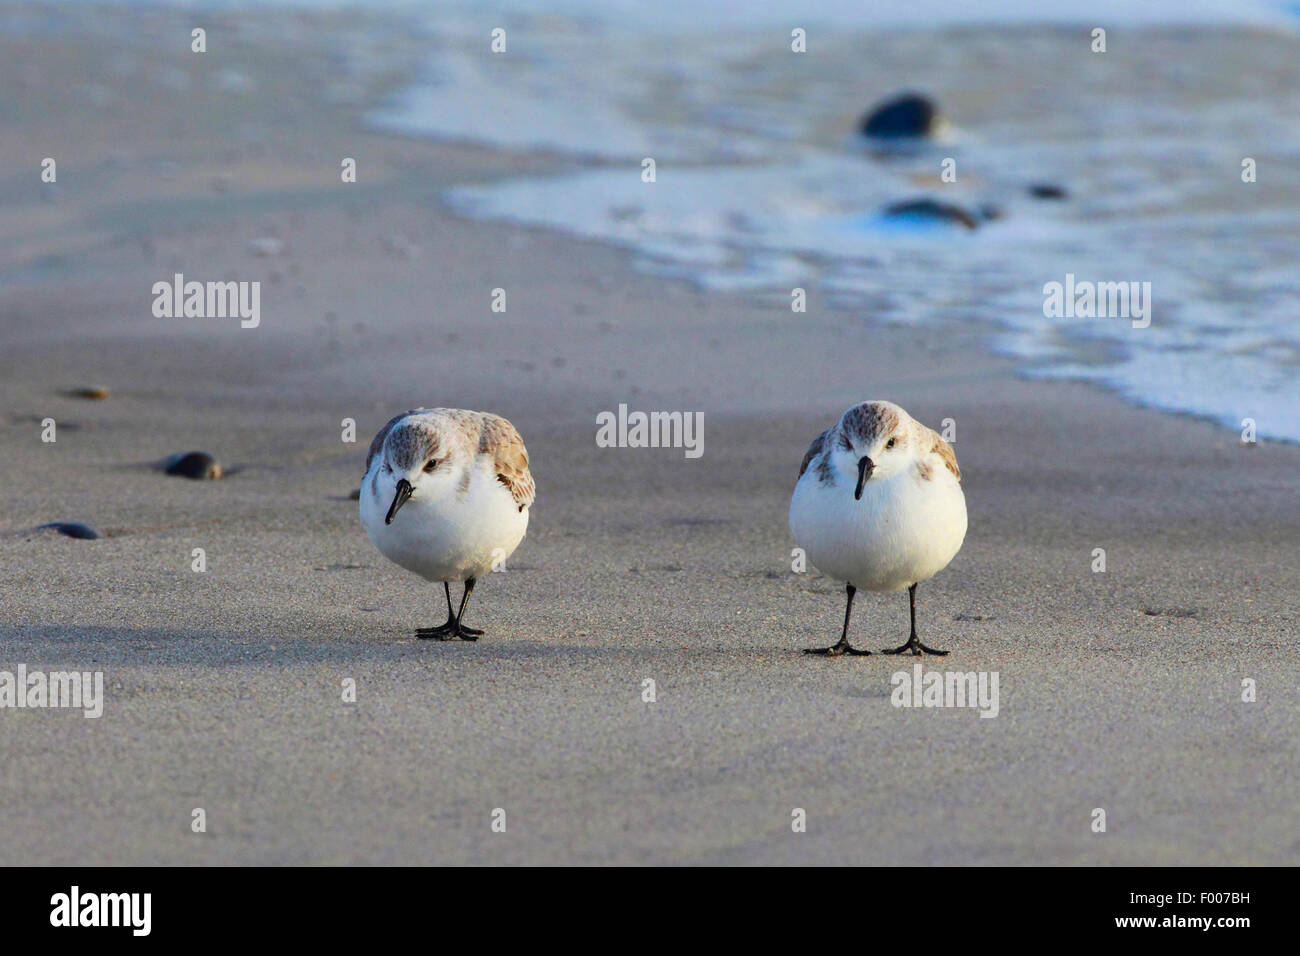 sanderling (Calidris alba), two searching for food sanderlings on the beach, Germany, Schleswig-Holstein, Heligoland Stock Photo